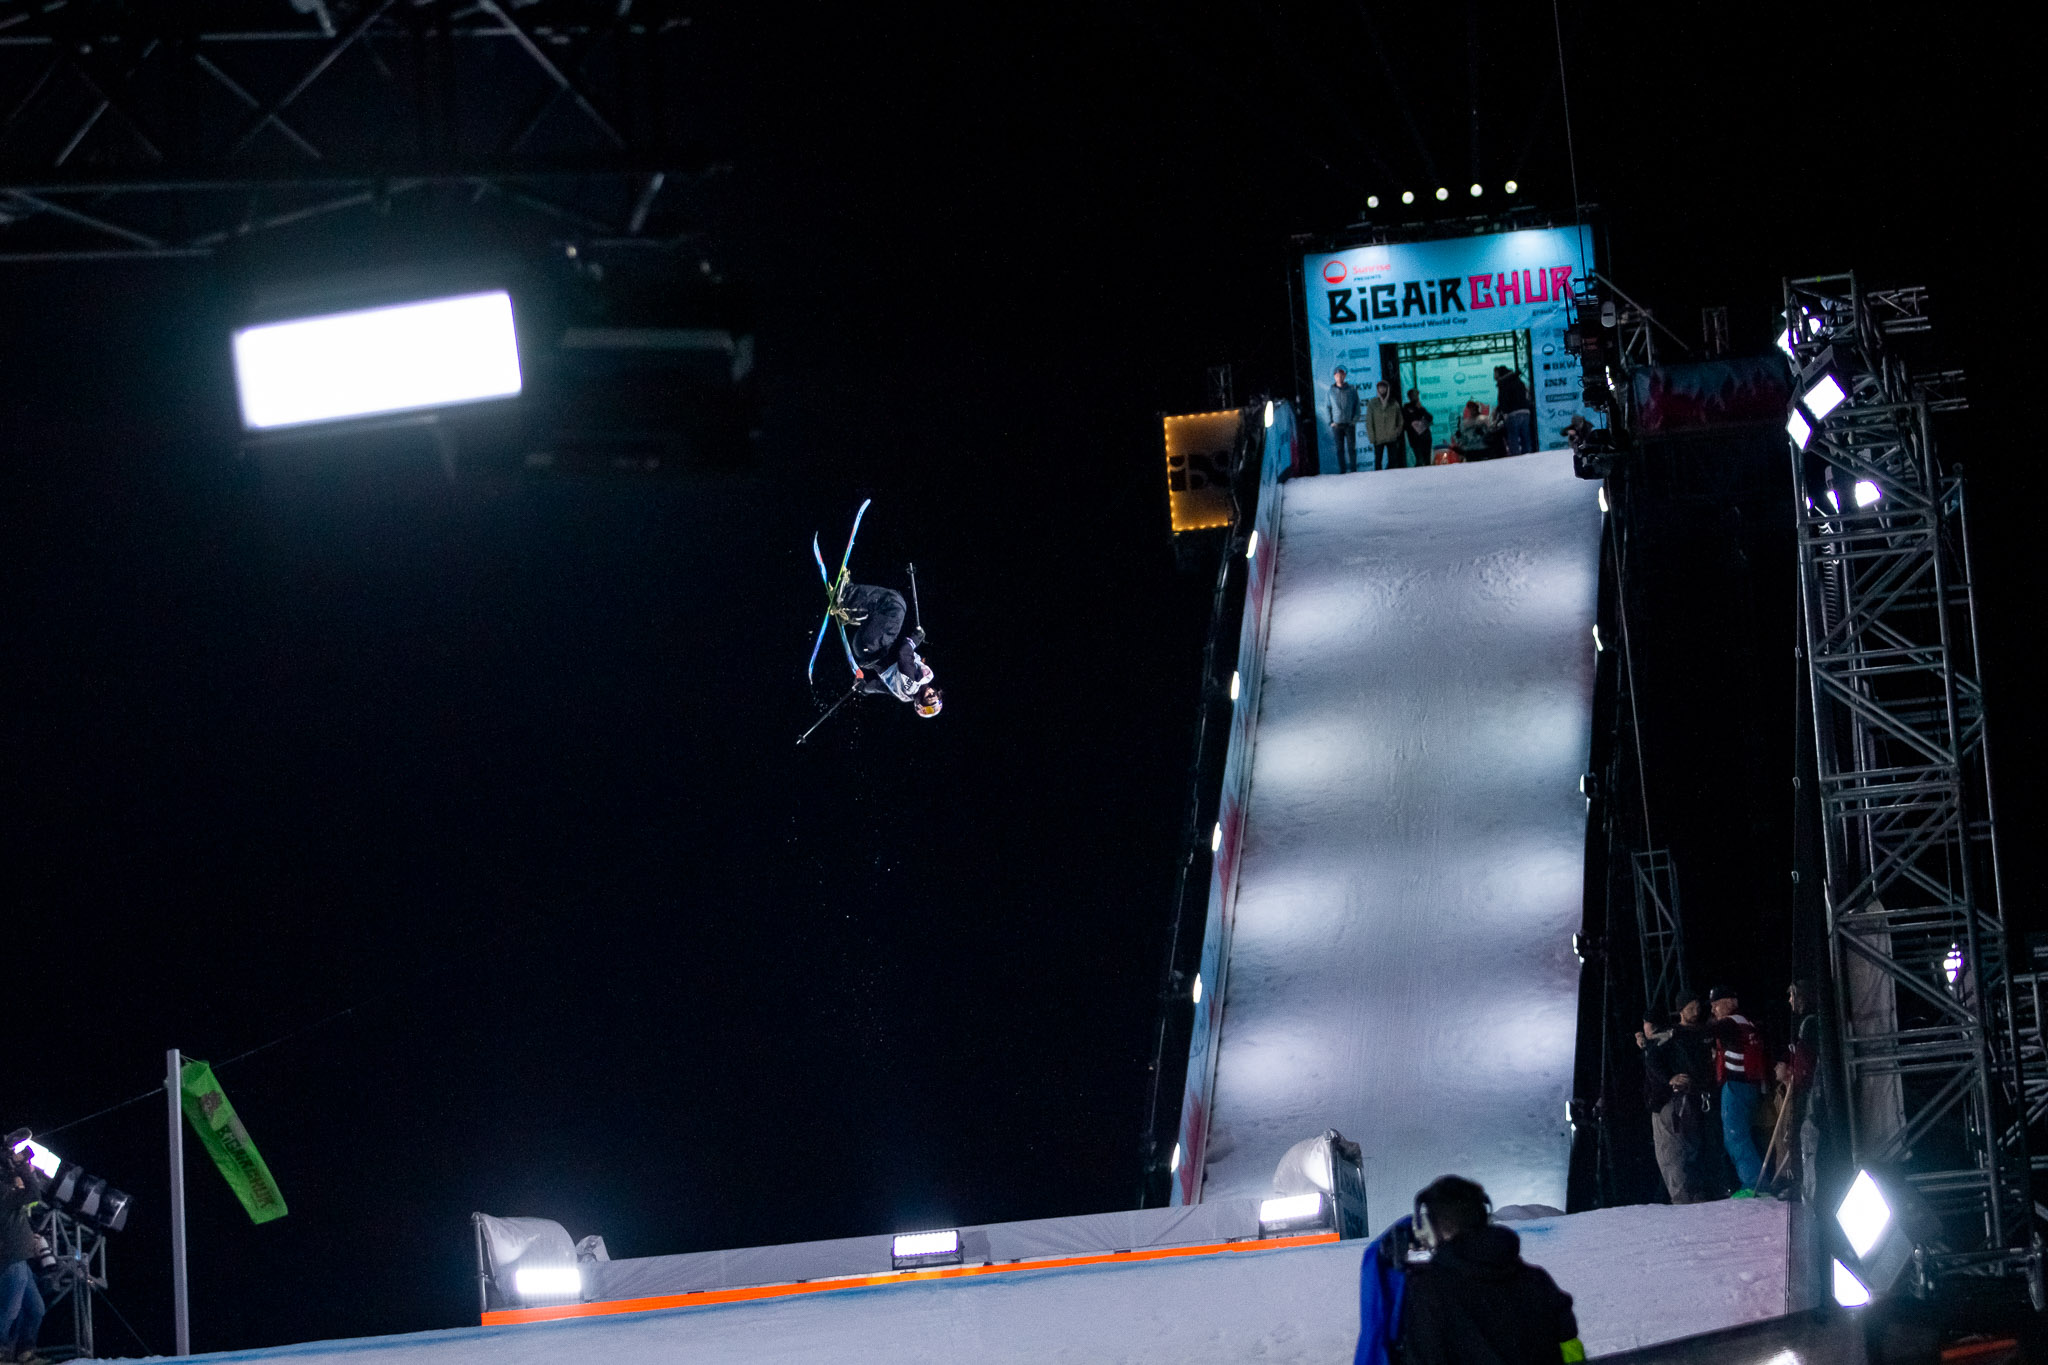 Kirsty Muir competes in the finals at Big Air Chur 2022